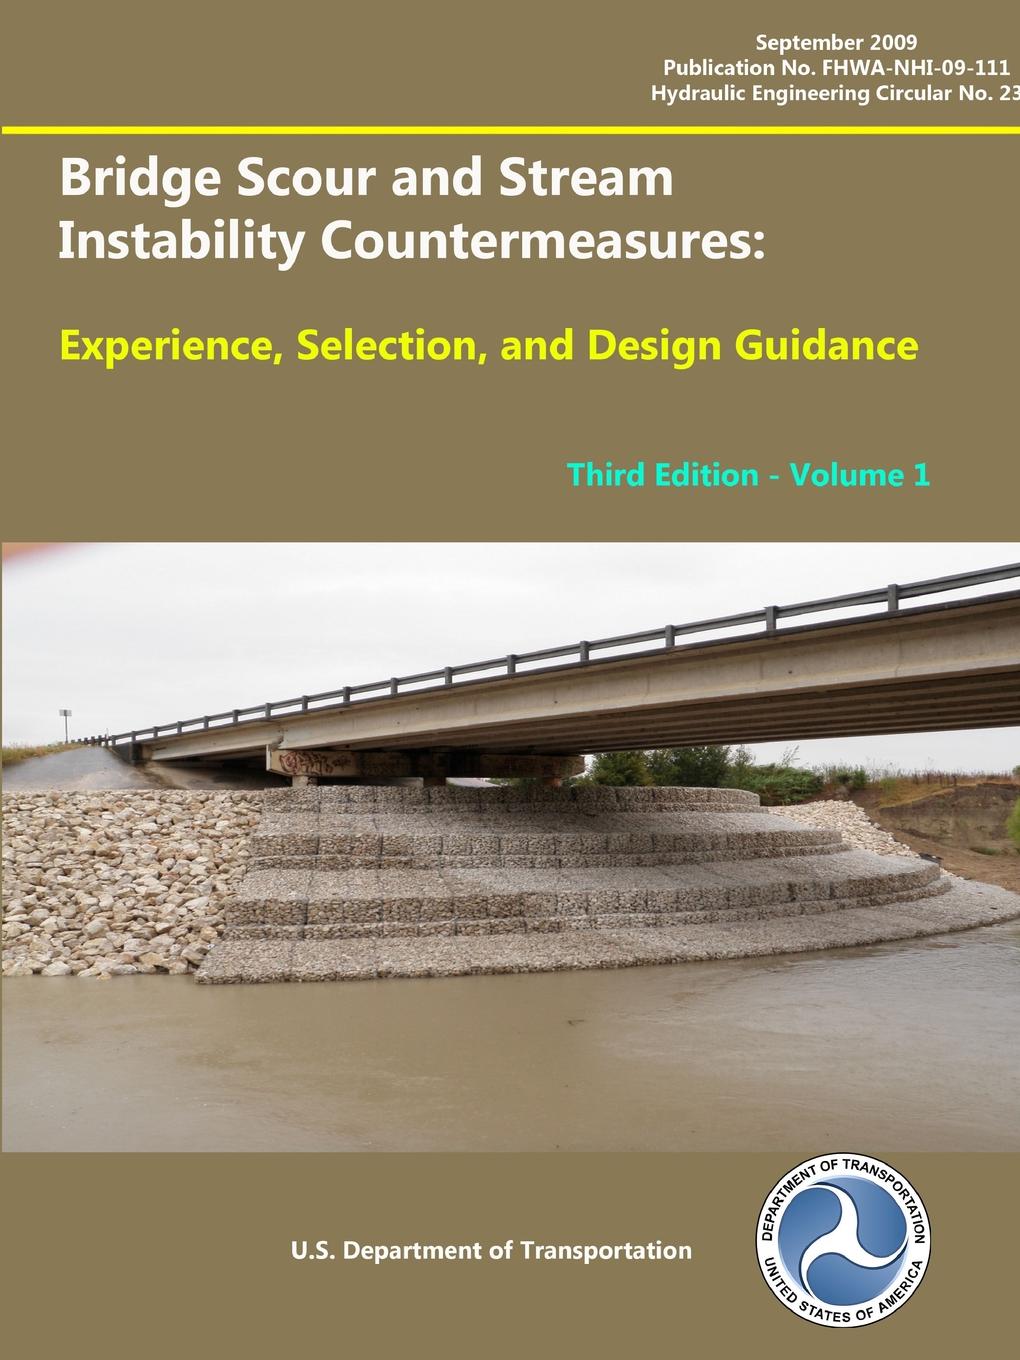 U.S. Department of Transportation Bridge Scour and Stream Instability Countermeasures. Experience, Selection, and Design Guidance - Third Edition (Volume 1)